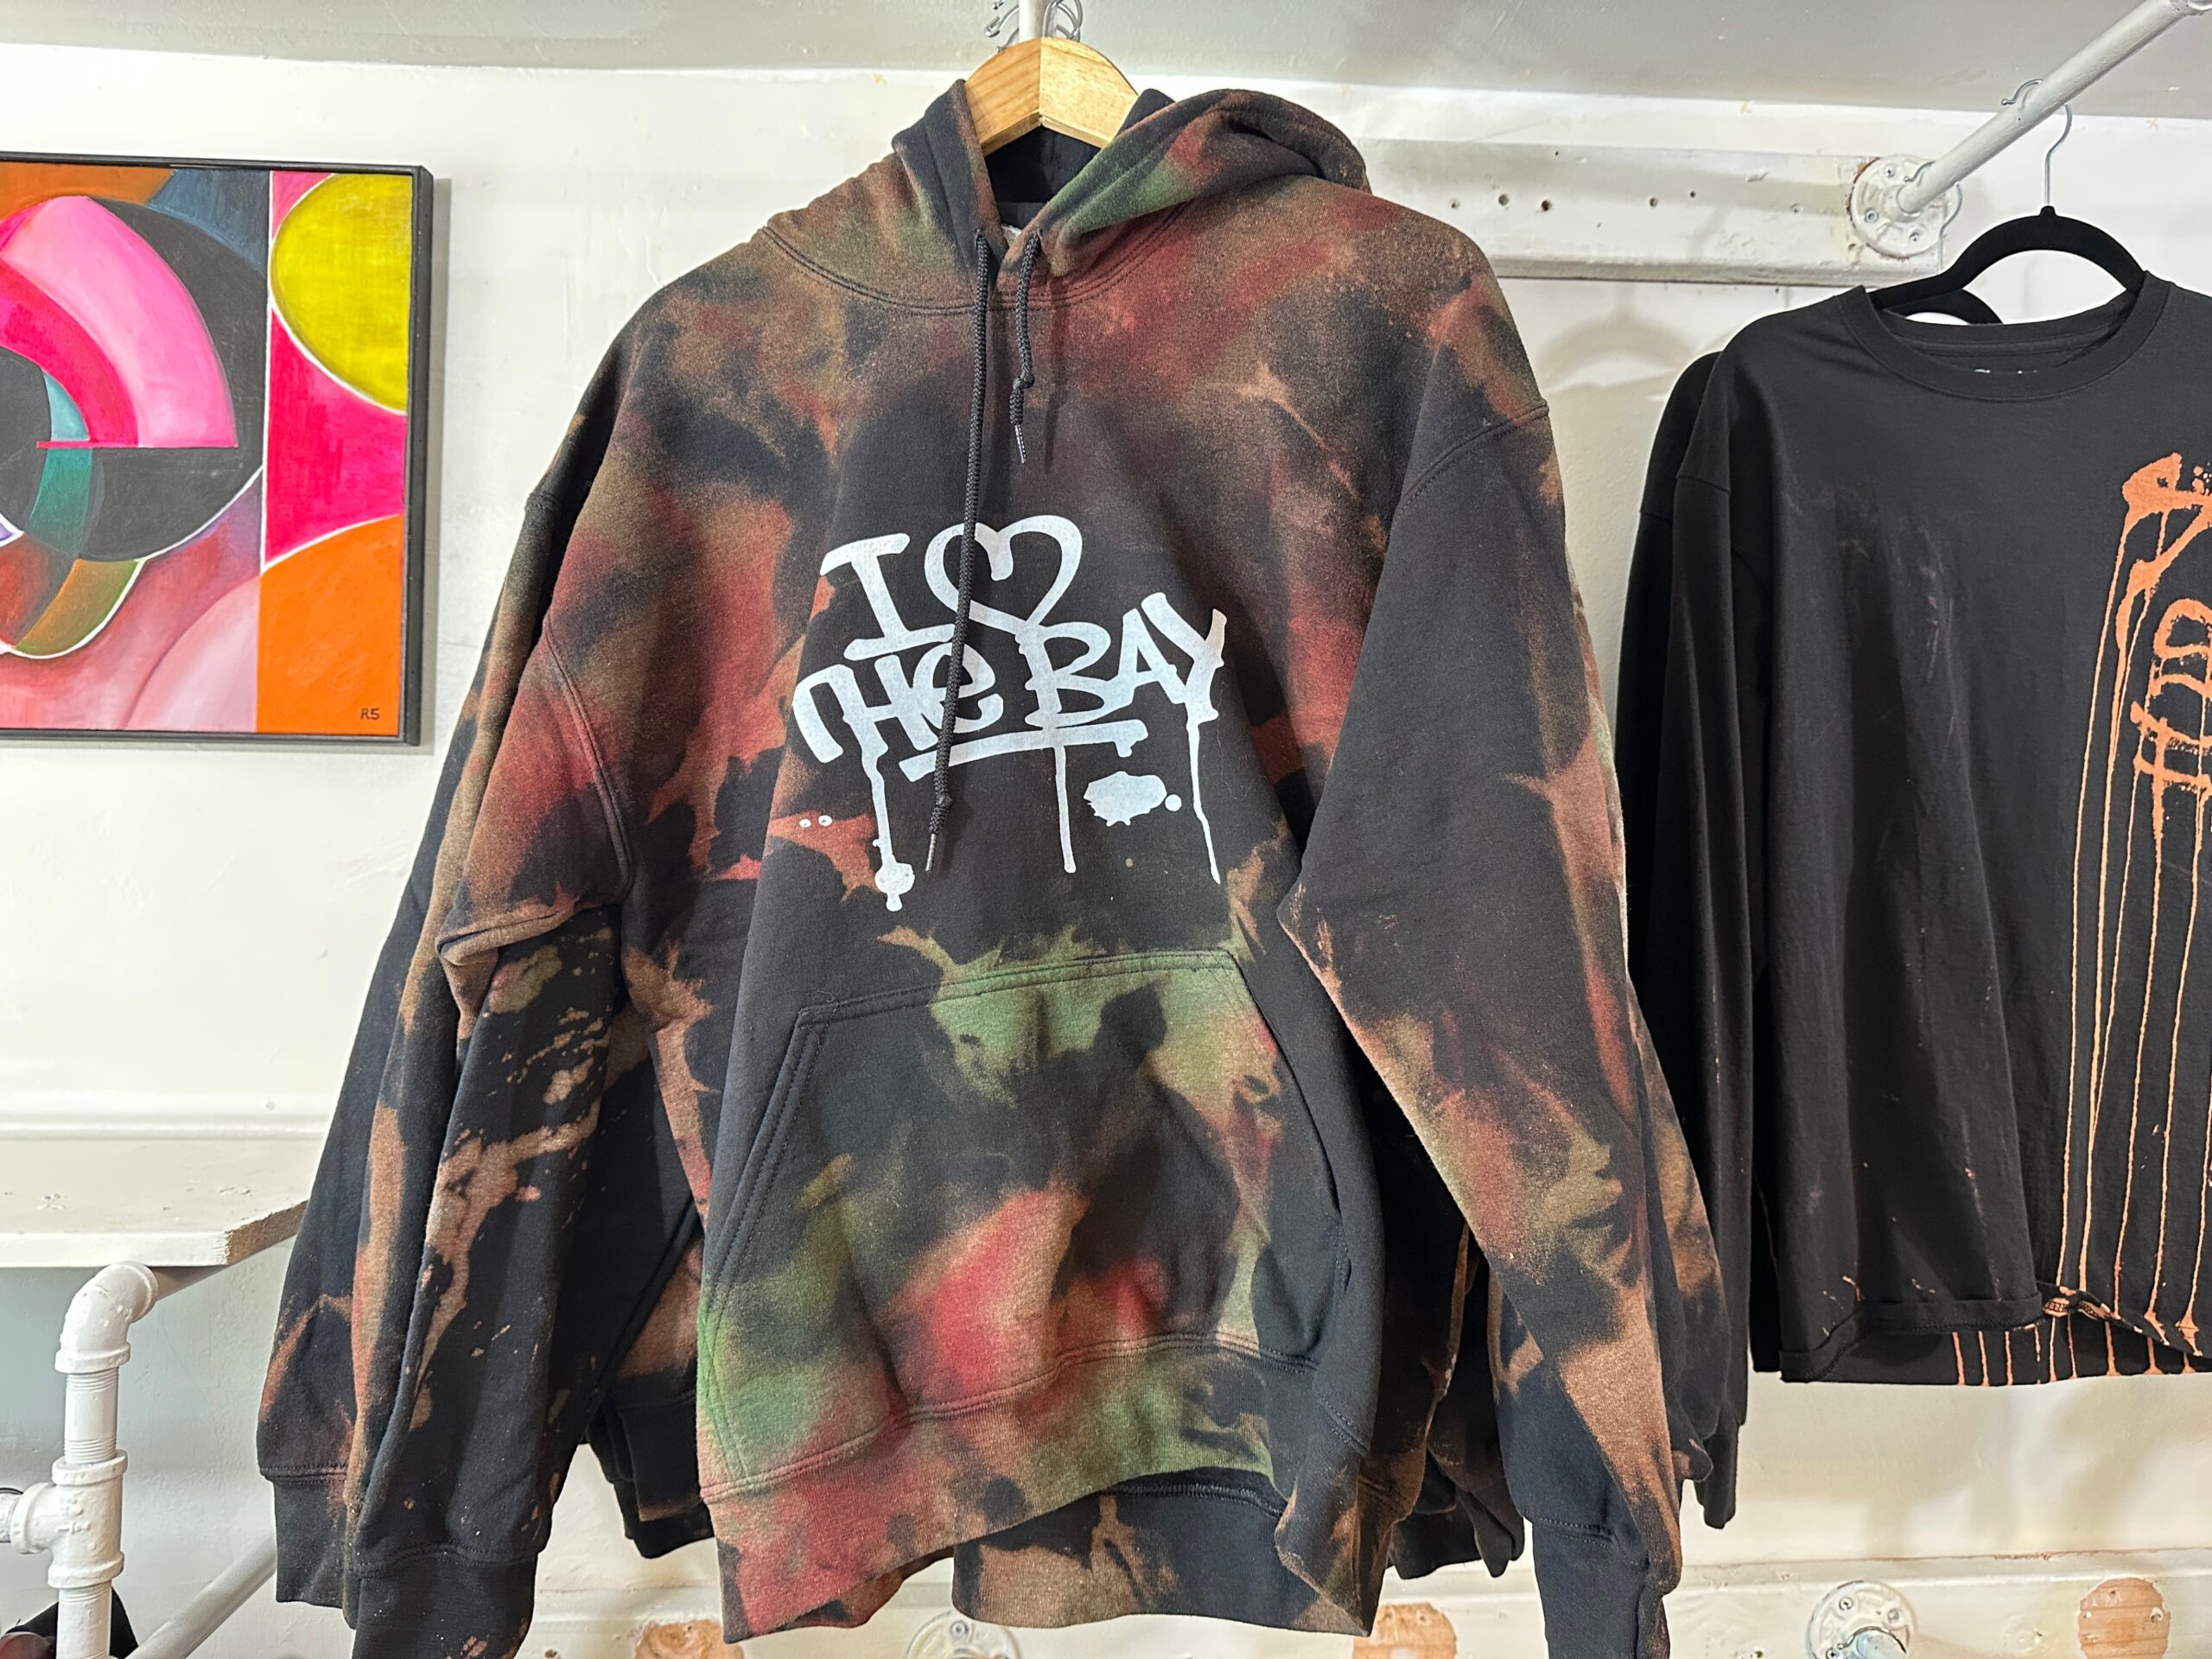 A hoodie with "I Love the Bay" graffiti lettering hangs in an art and apparel shop on Valencia Street in San Francisco.